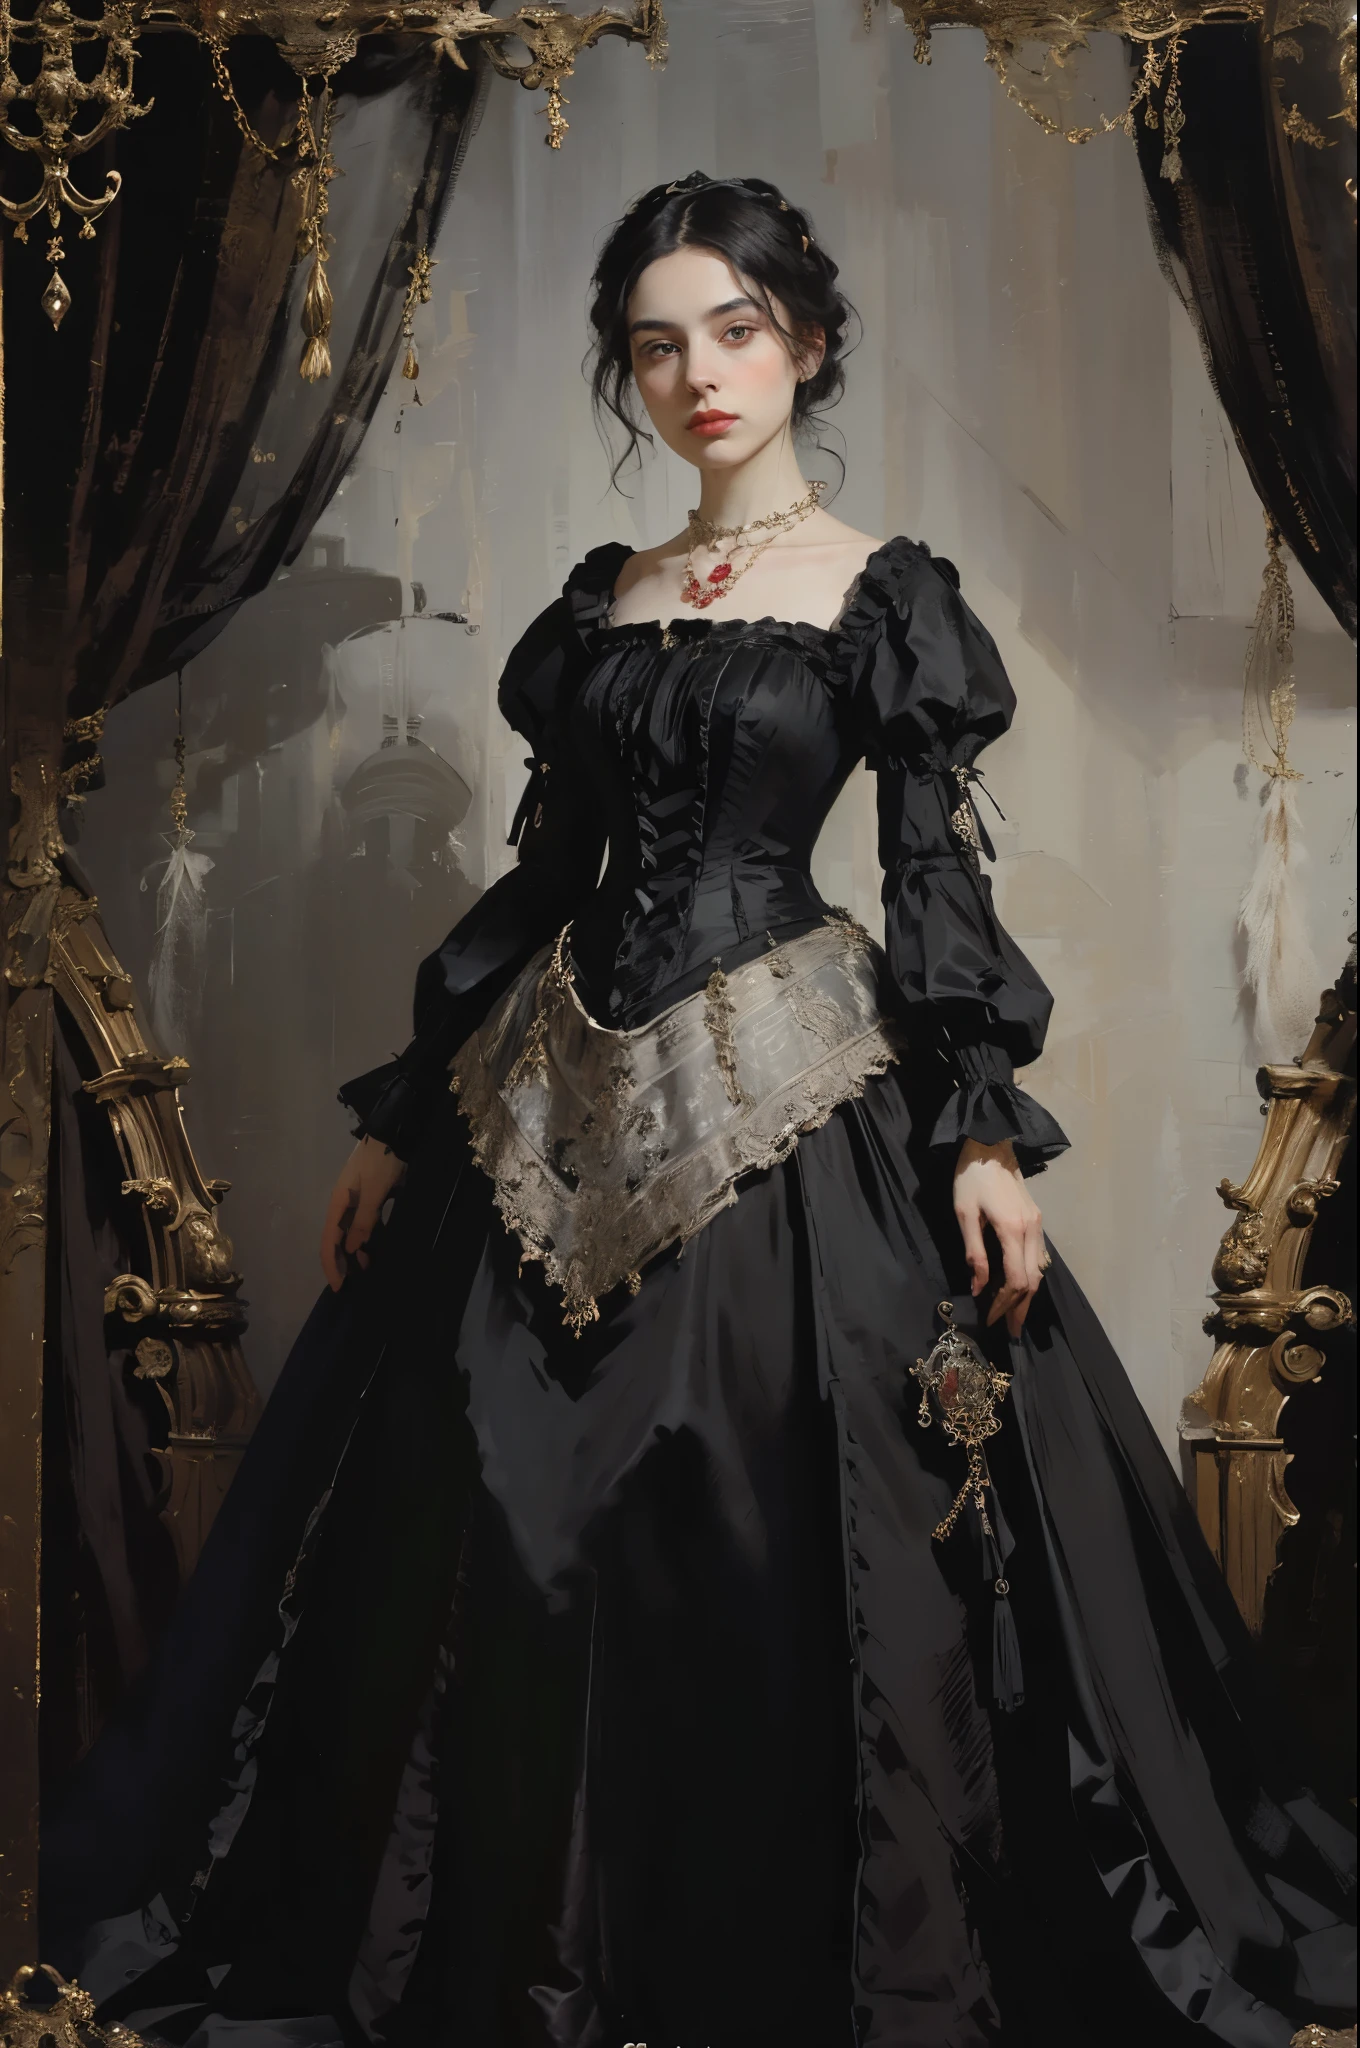 classical painting, ((PORTRAIT: 1.3)), a girl in a black dress, a formal dress of the Victorian style, (Victorian evening dress: 1.3), the dress has a stand-up collar, a young girl 25 years old, pale skin, slender, monochrome image with accent color, red ruby necklace,